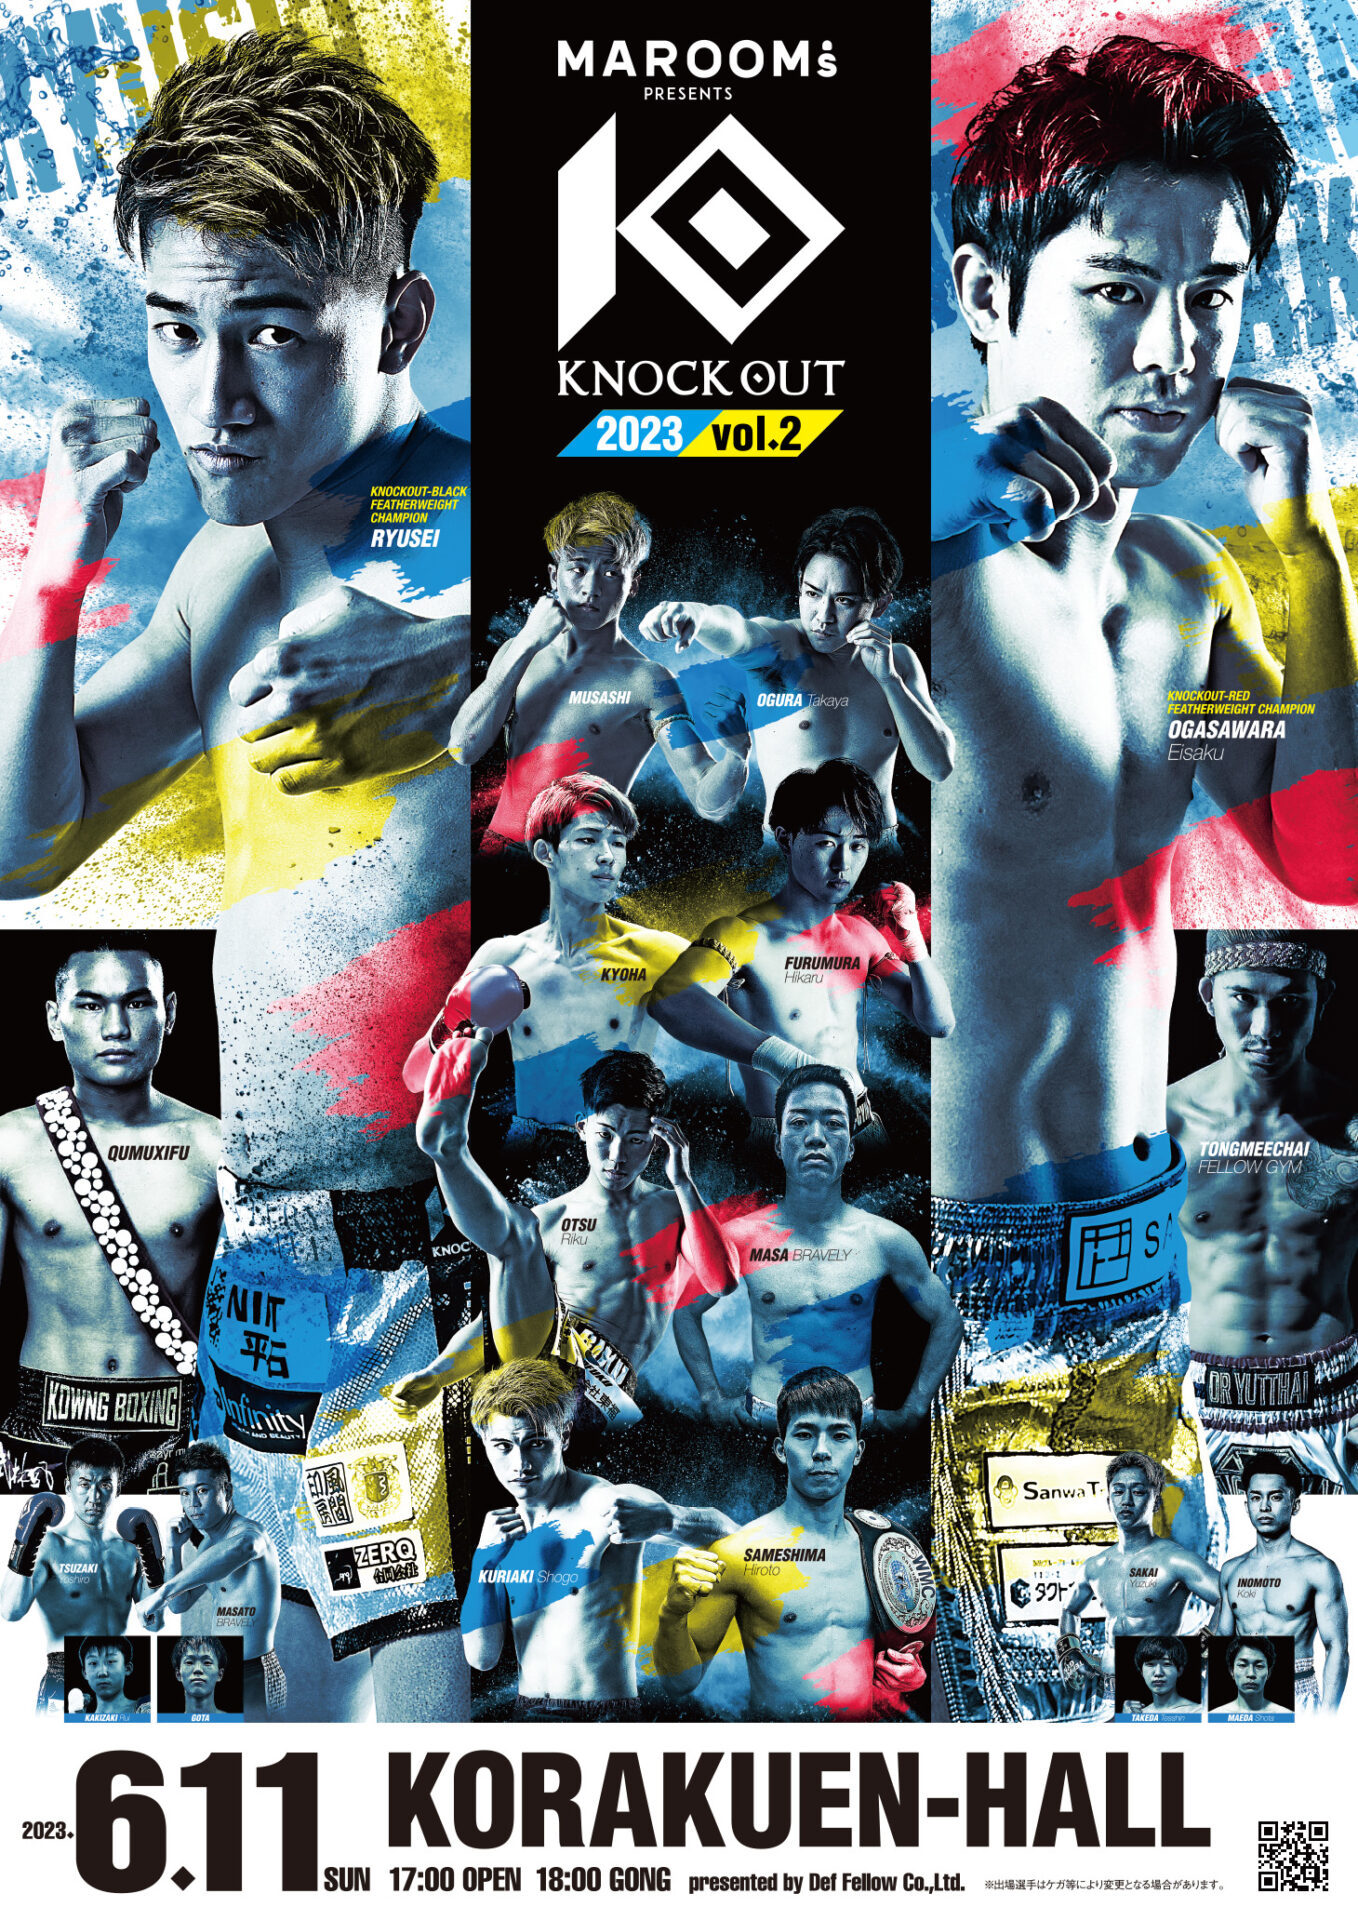 『MAROOMS presents KNOCK OUT 2023 vol.2』は6月11日（日）に後楽園ホールで開催される